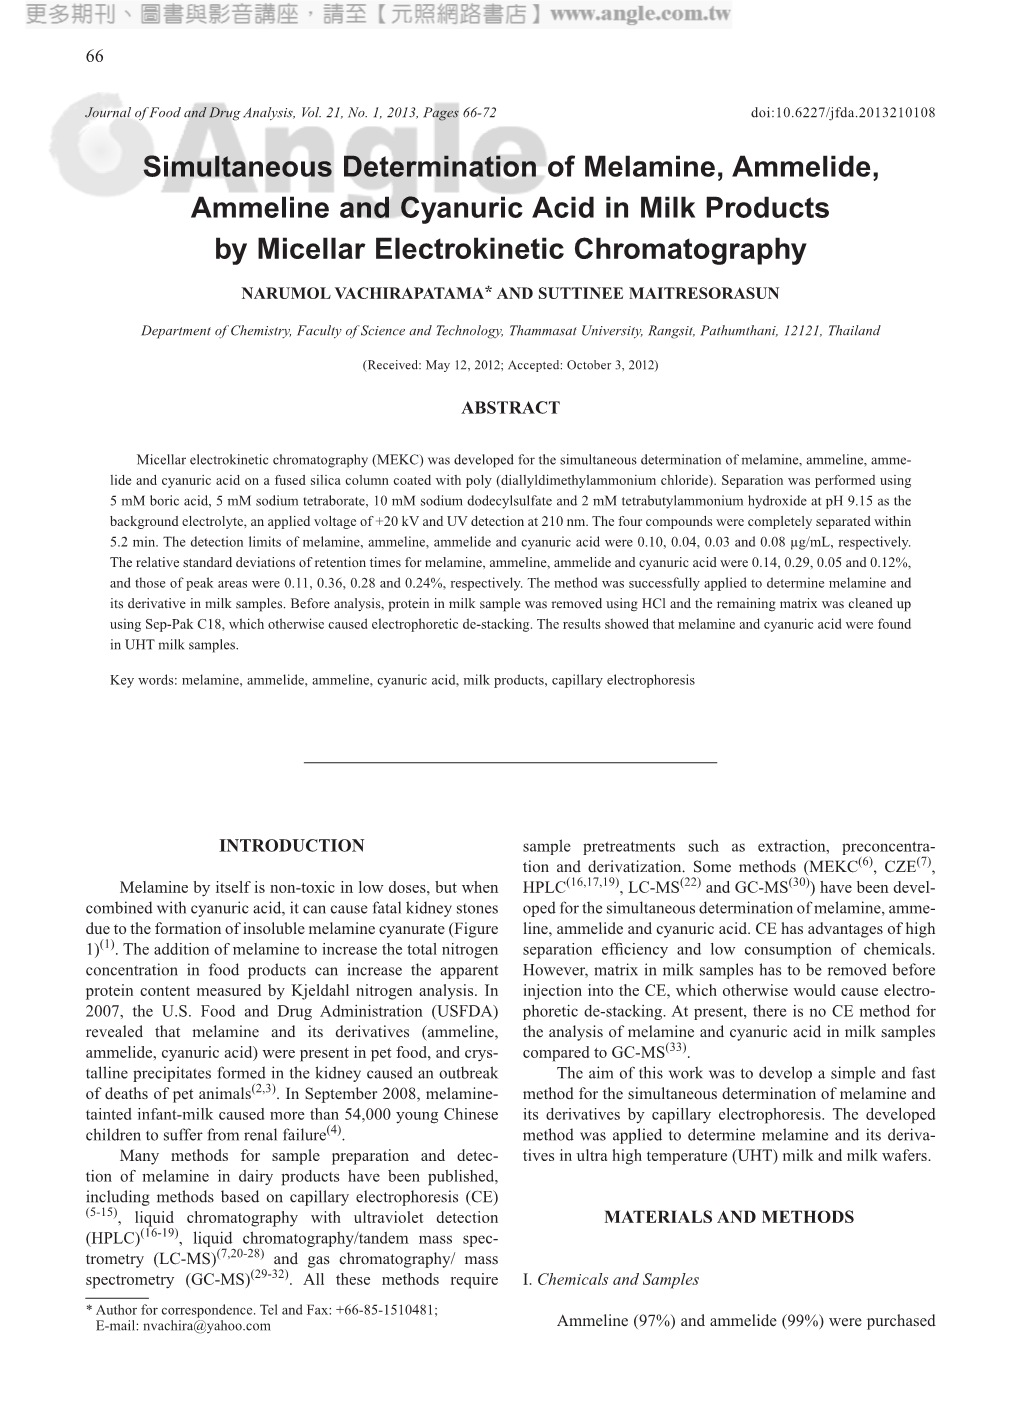 Simultaneous Determination of Melamine, Ammelide, Ammeline and Cyanuric Acid in Milk Products by Micellar Electrokinetic Chromatography